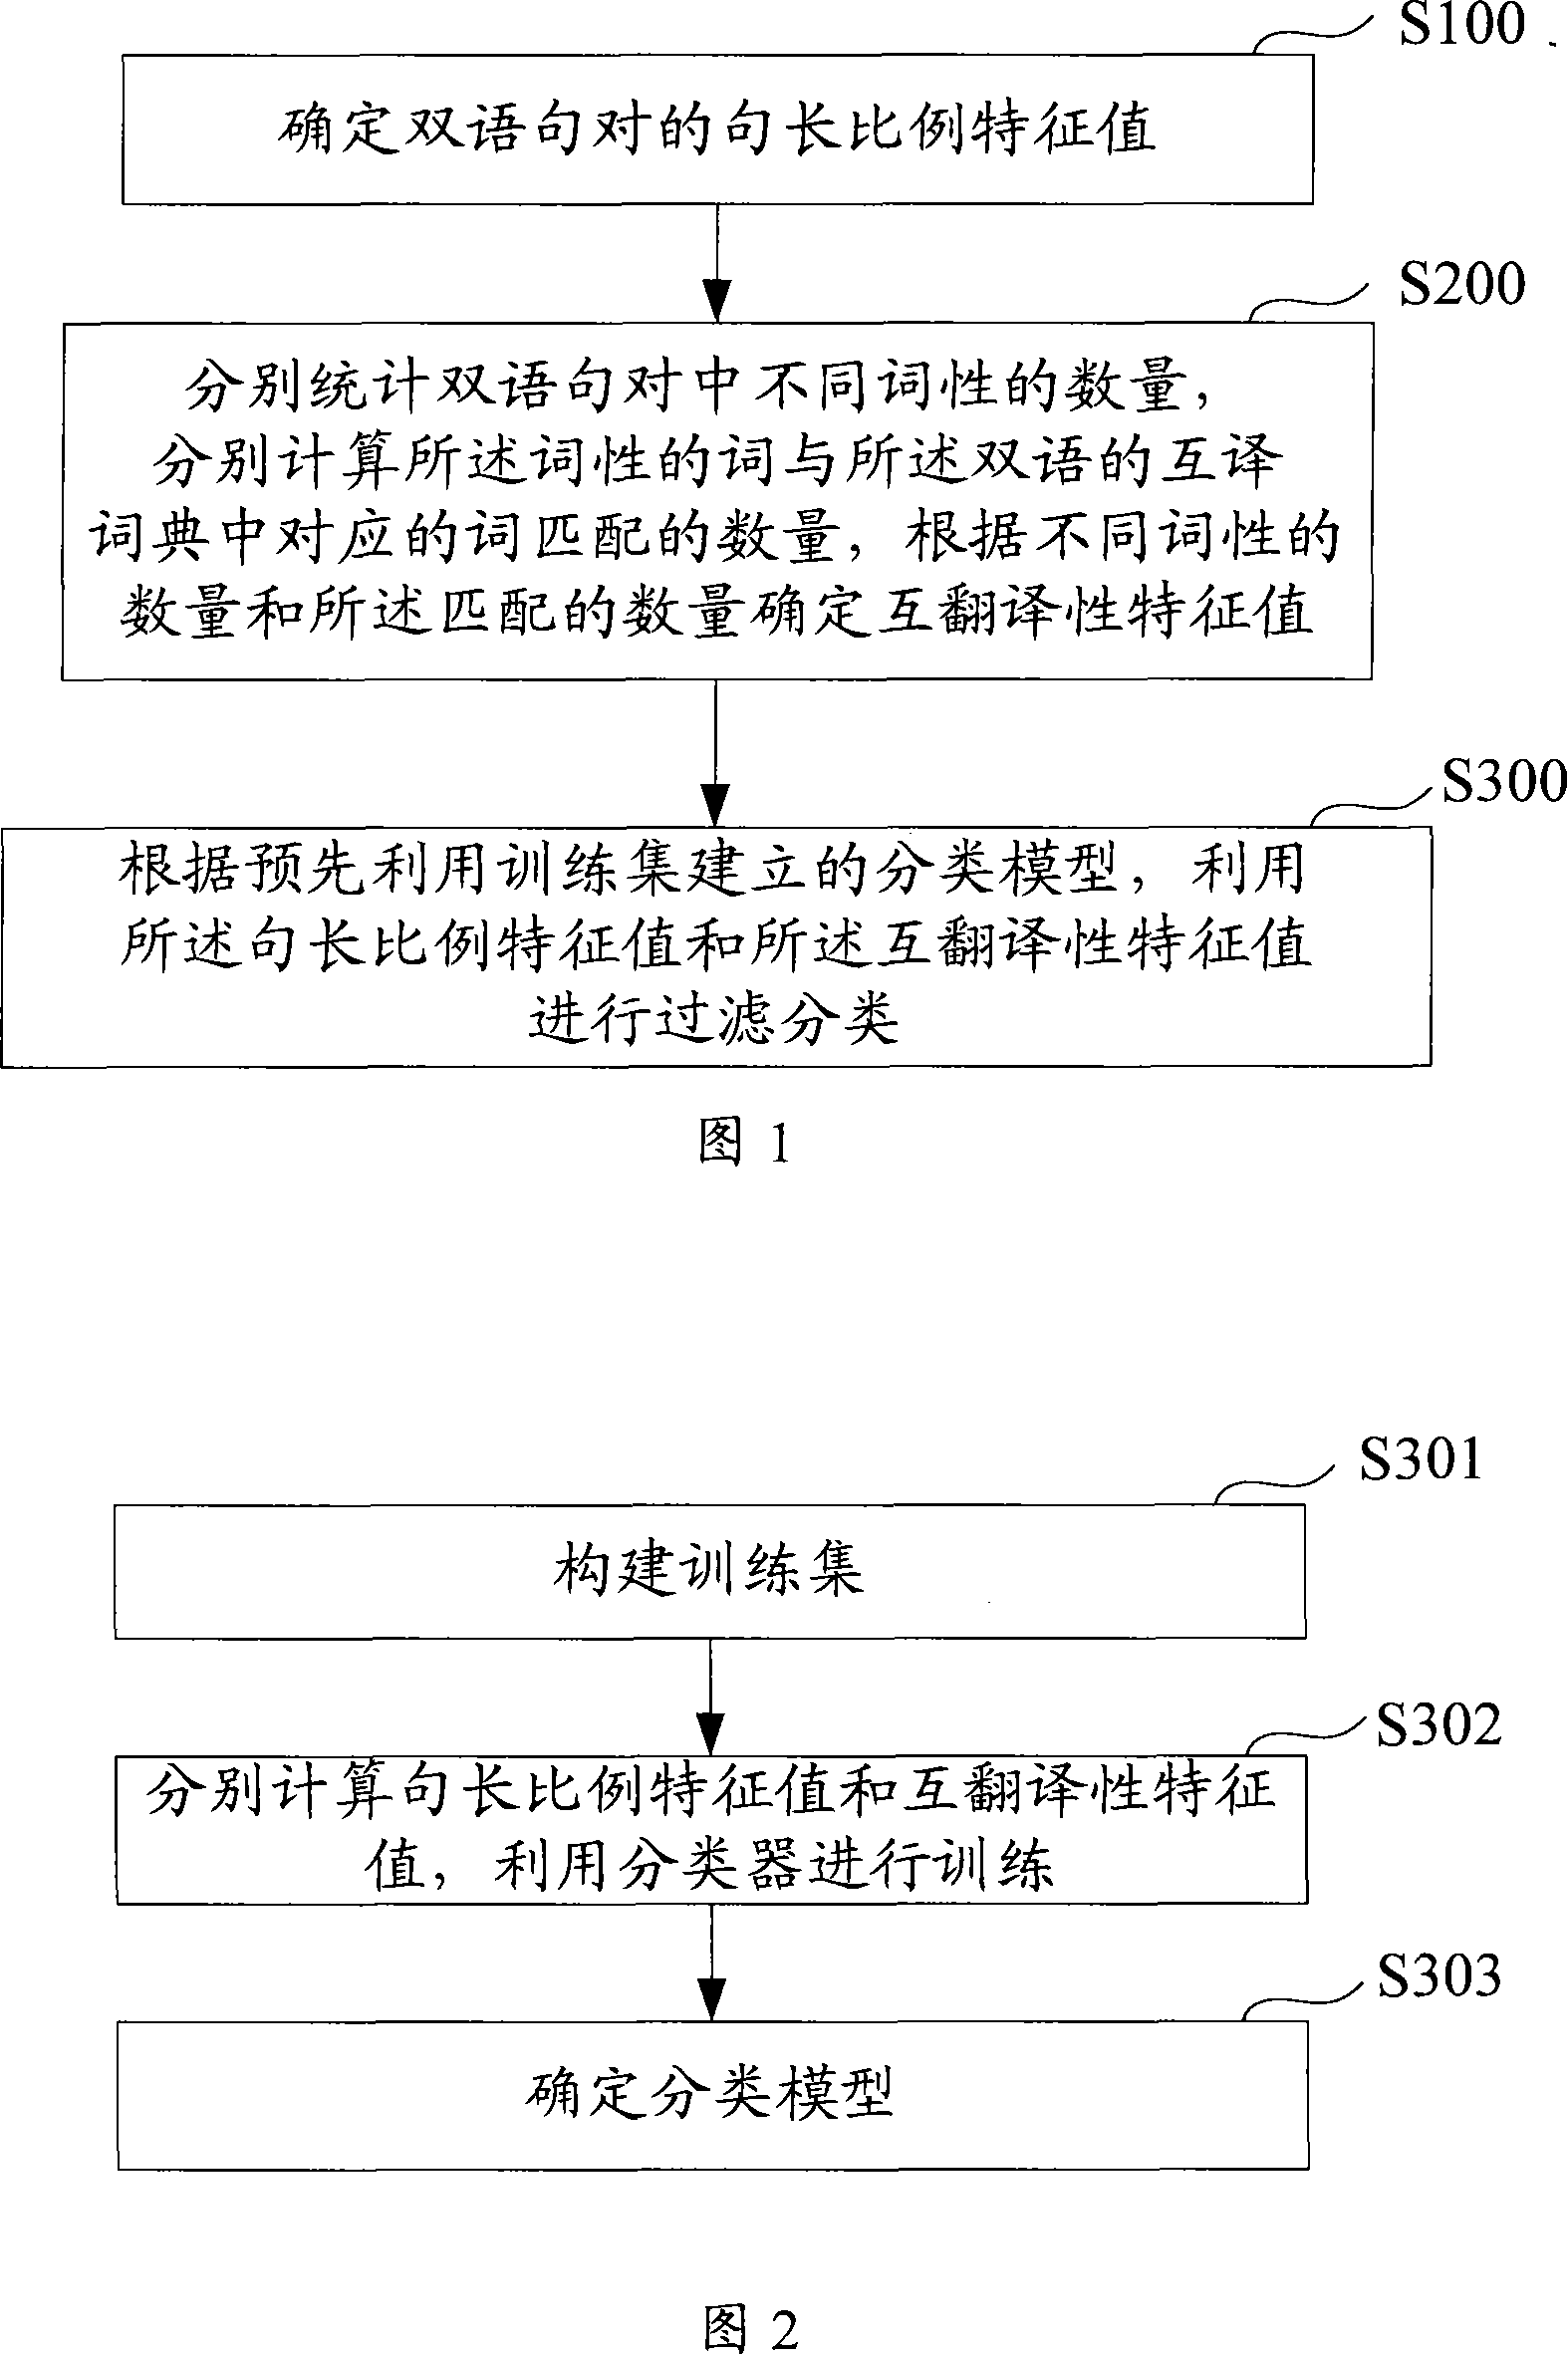 Method and system for filtering bilingualism corpora